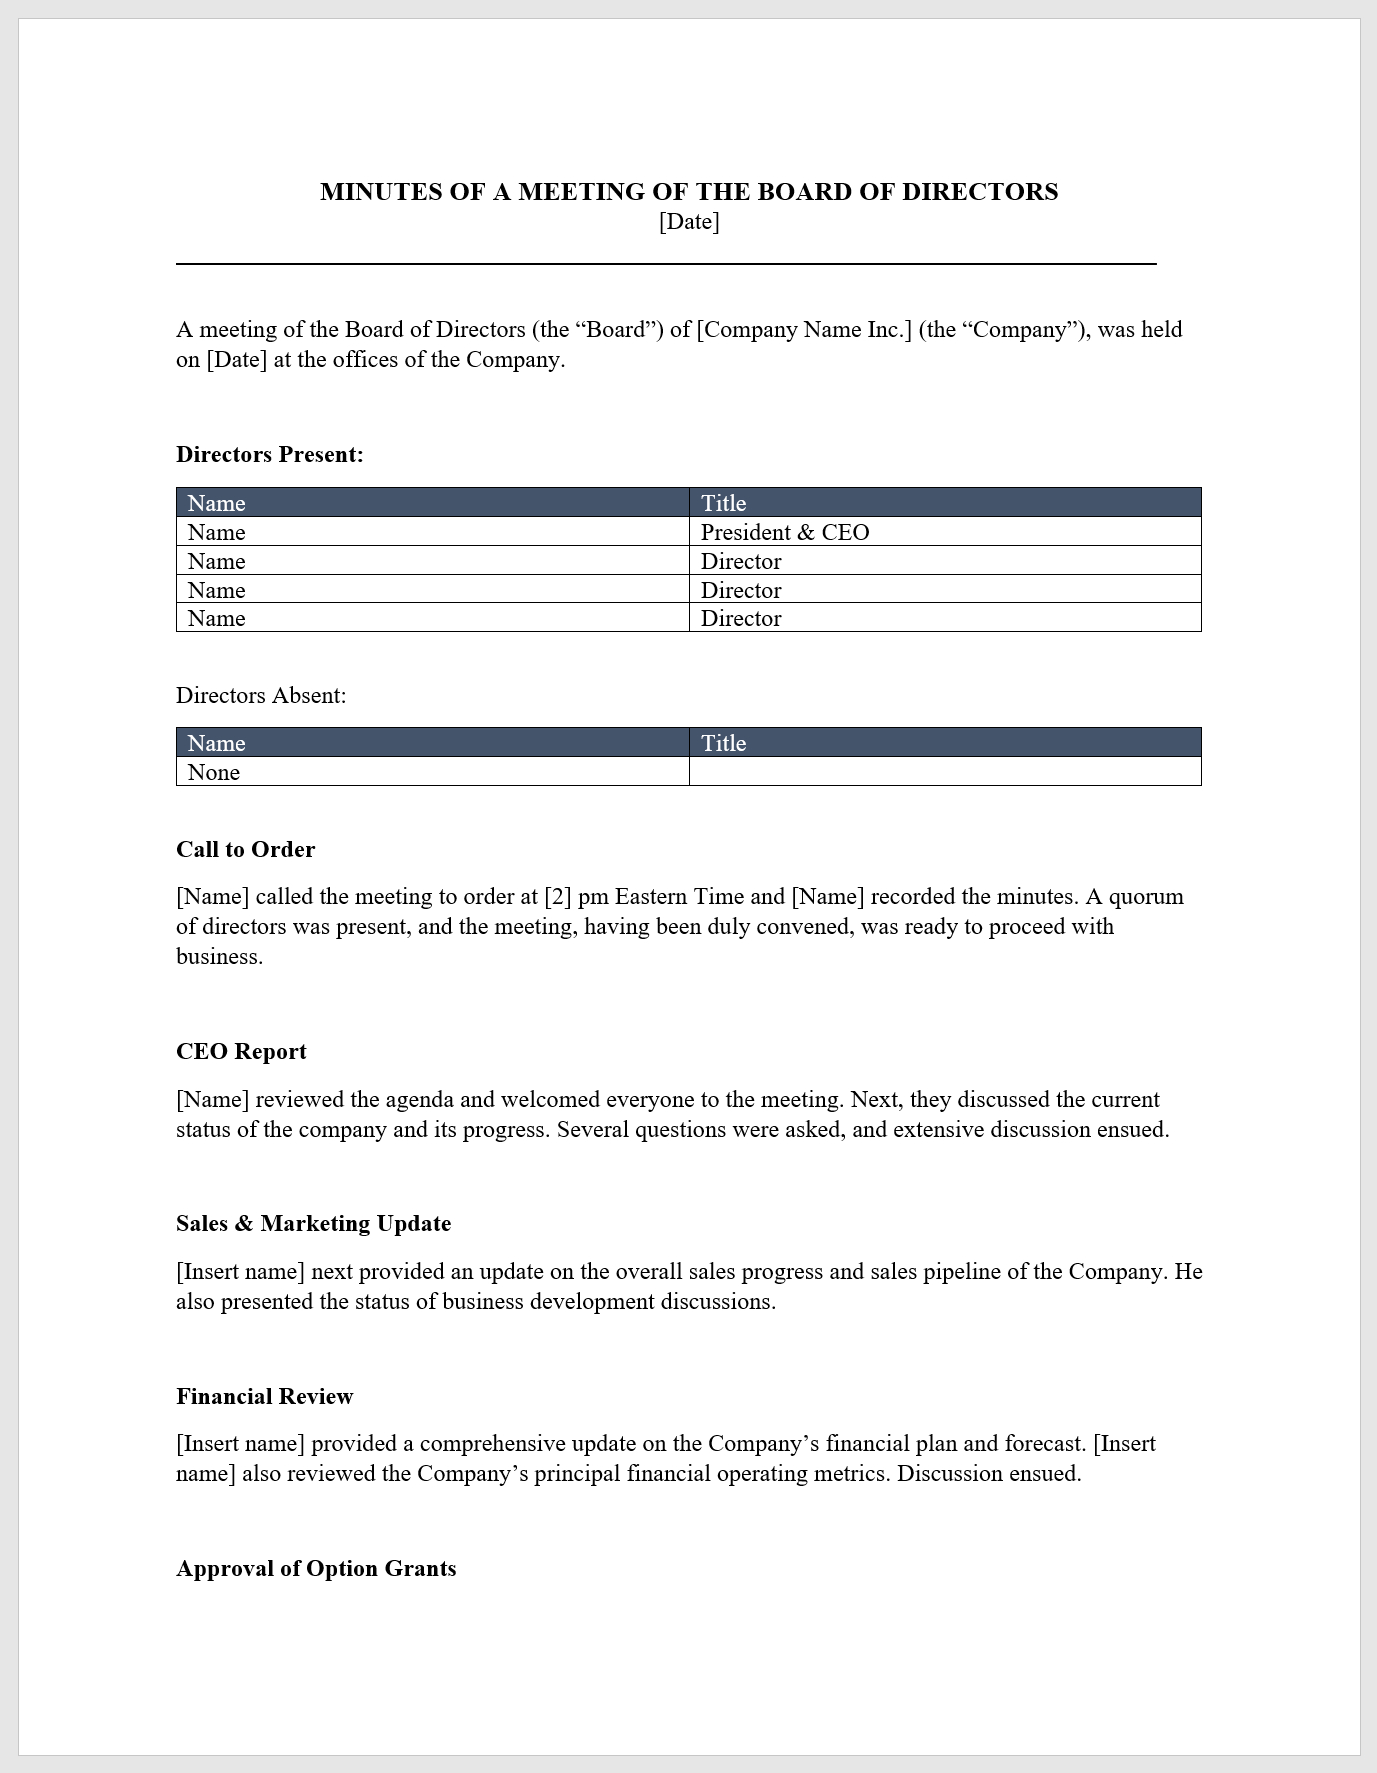 Board Meeting Minutes Template Download From Cfi Marketplace throughout dimensions 1377 X 1773